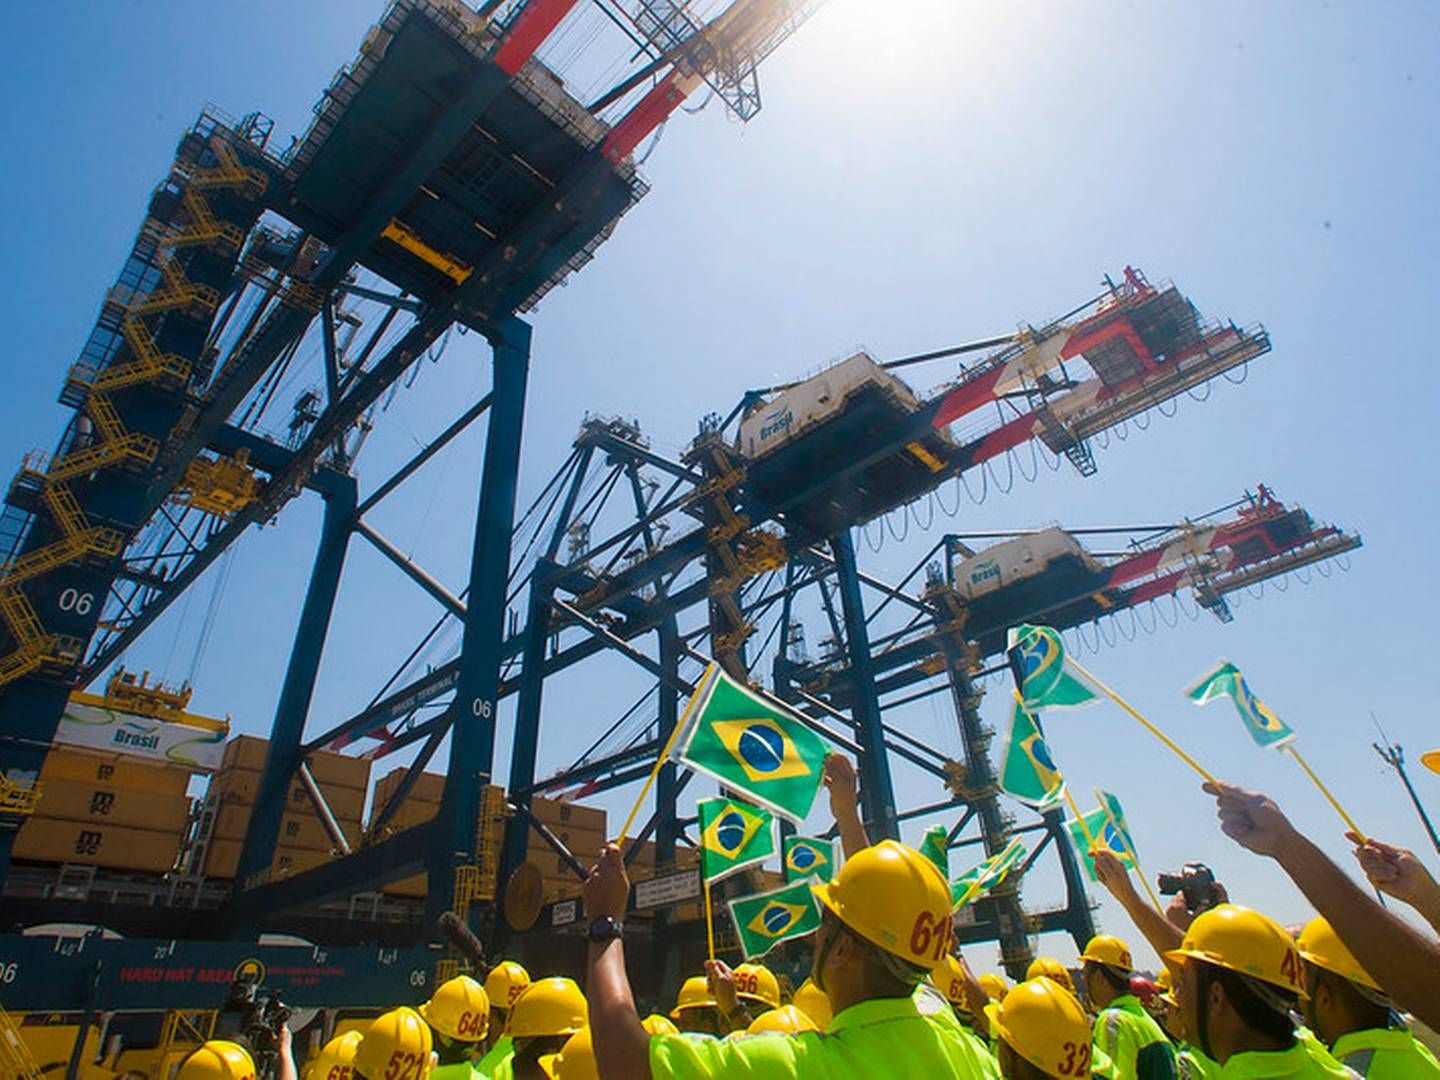 Maersk's port terminal in Brazilian Santos has been in operation since 2013. | Photo: APM Terminals